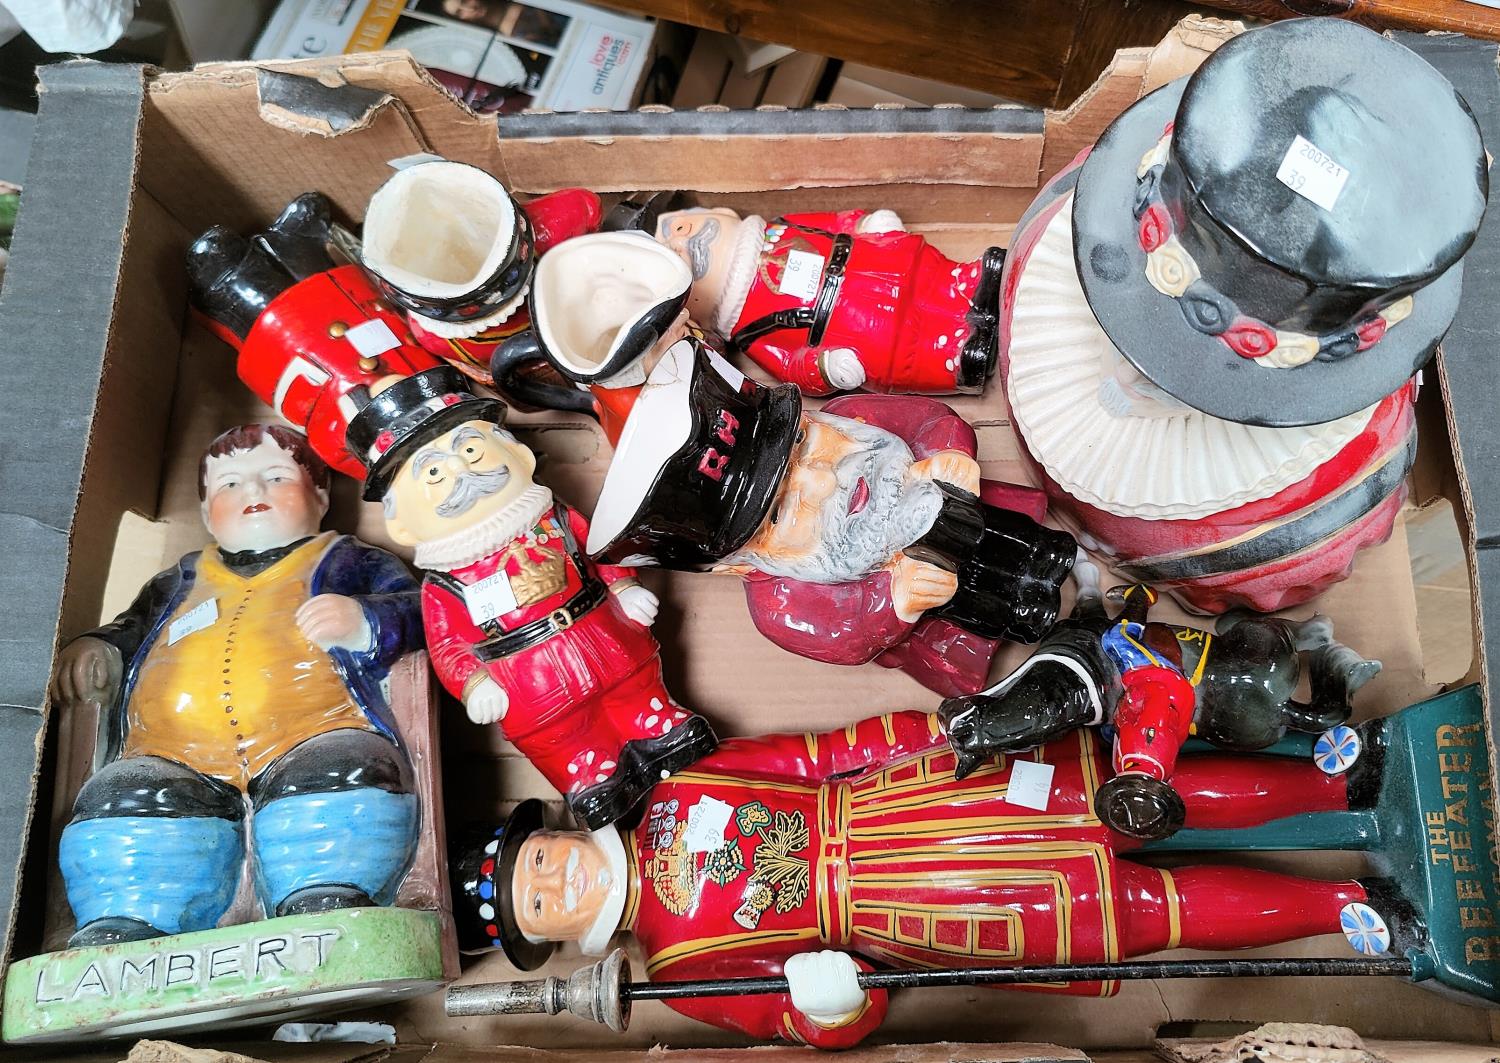 A collection of various Beefeater figures